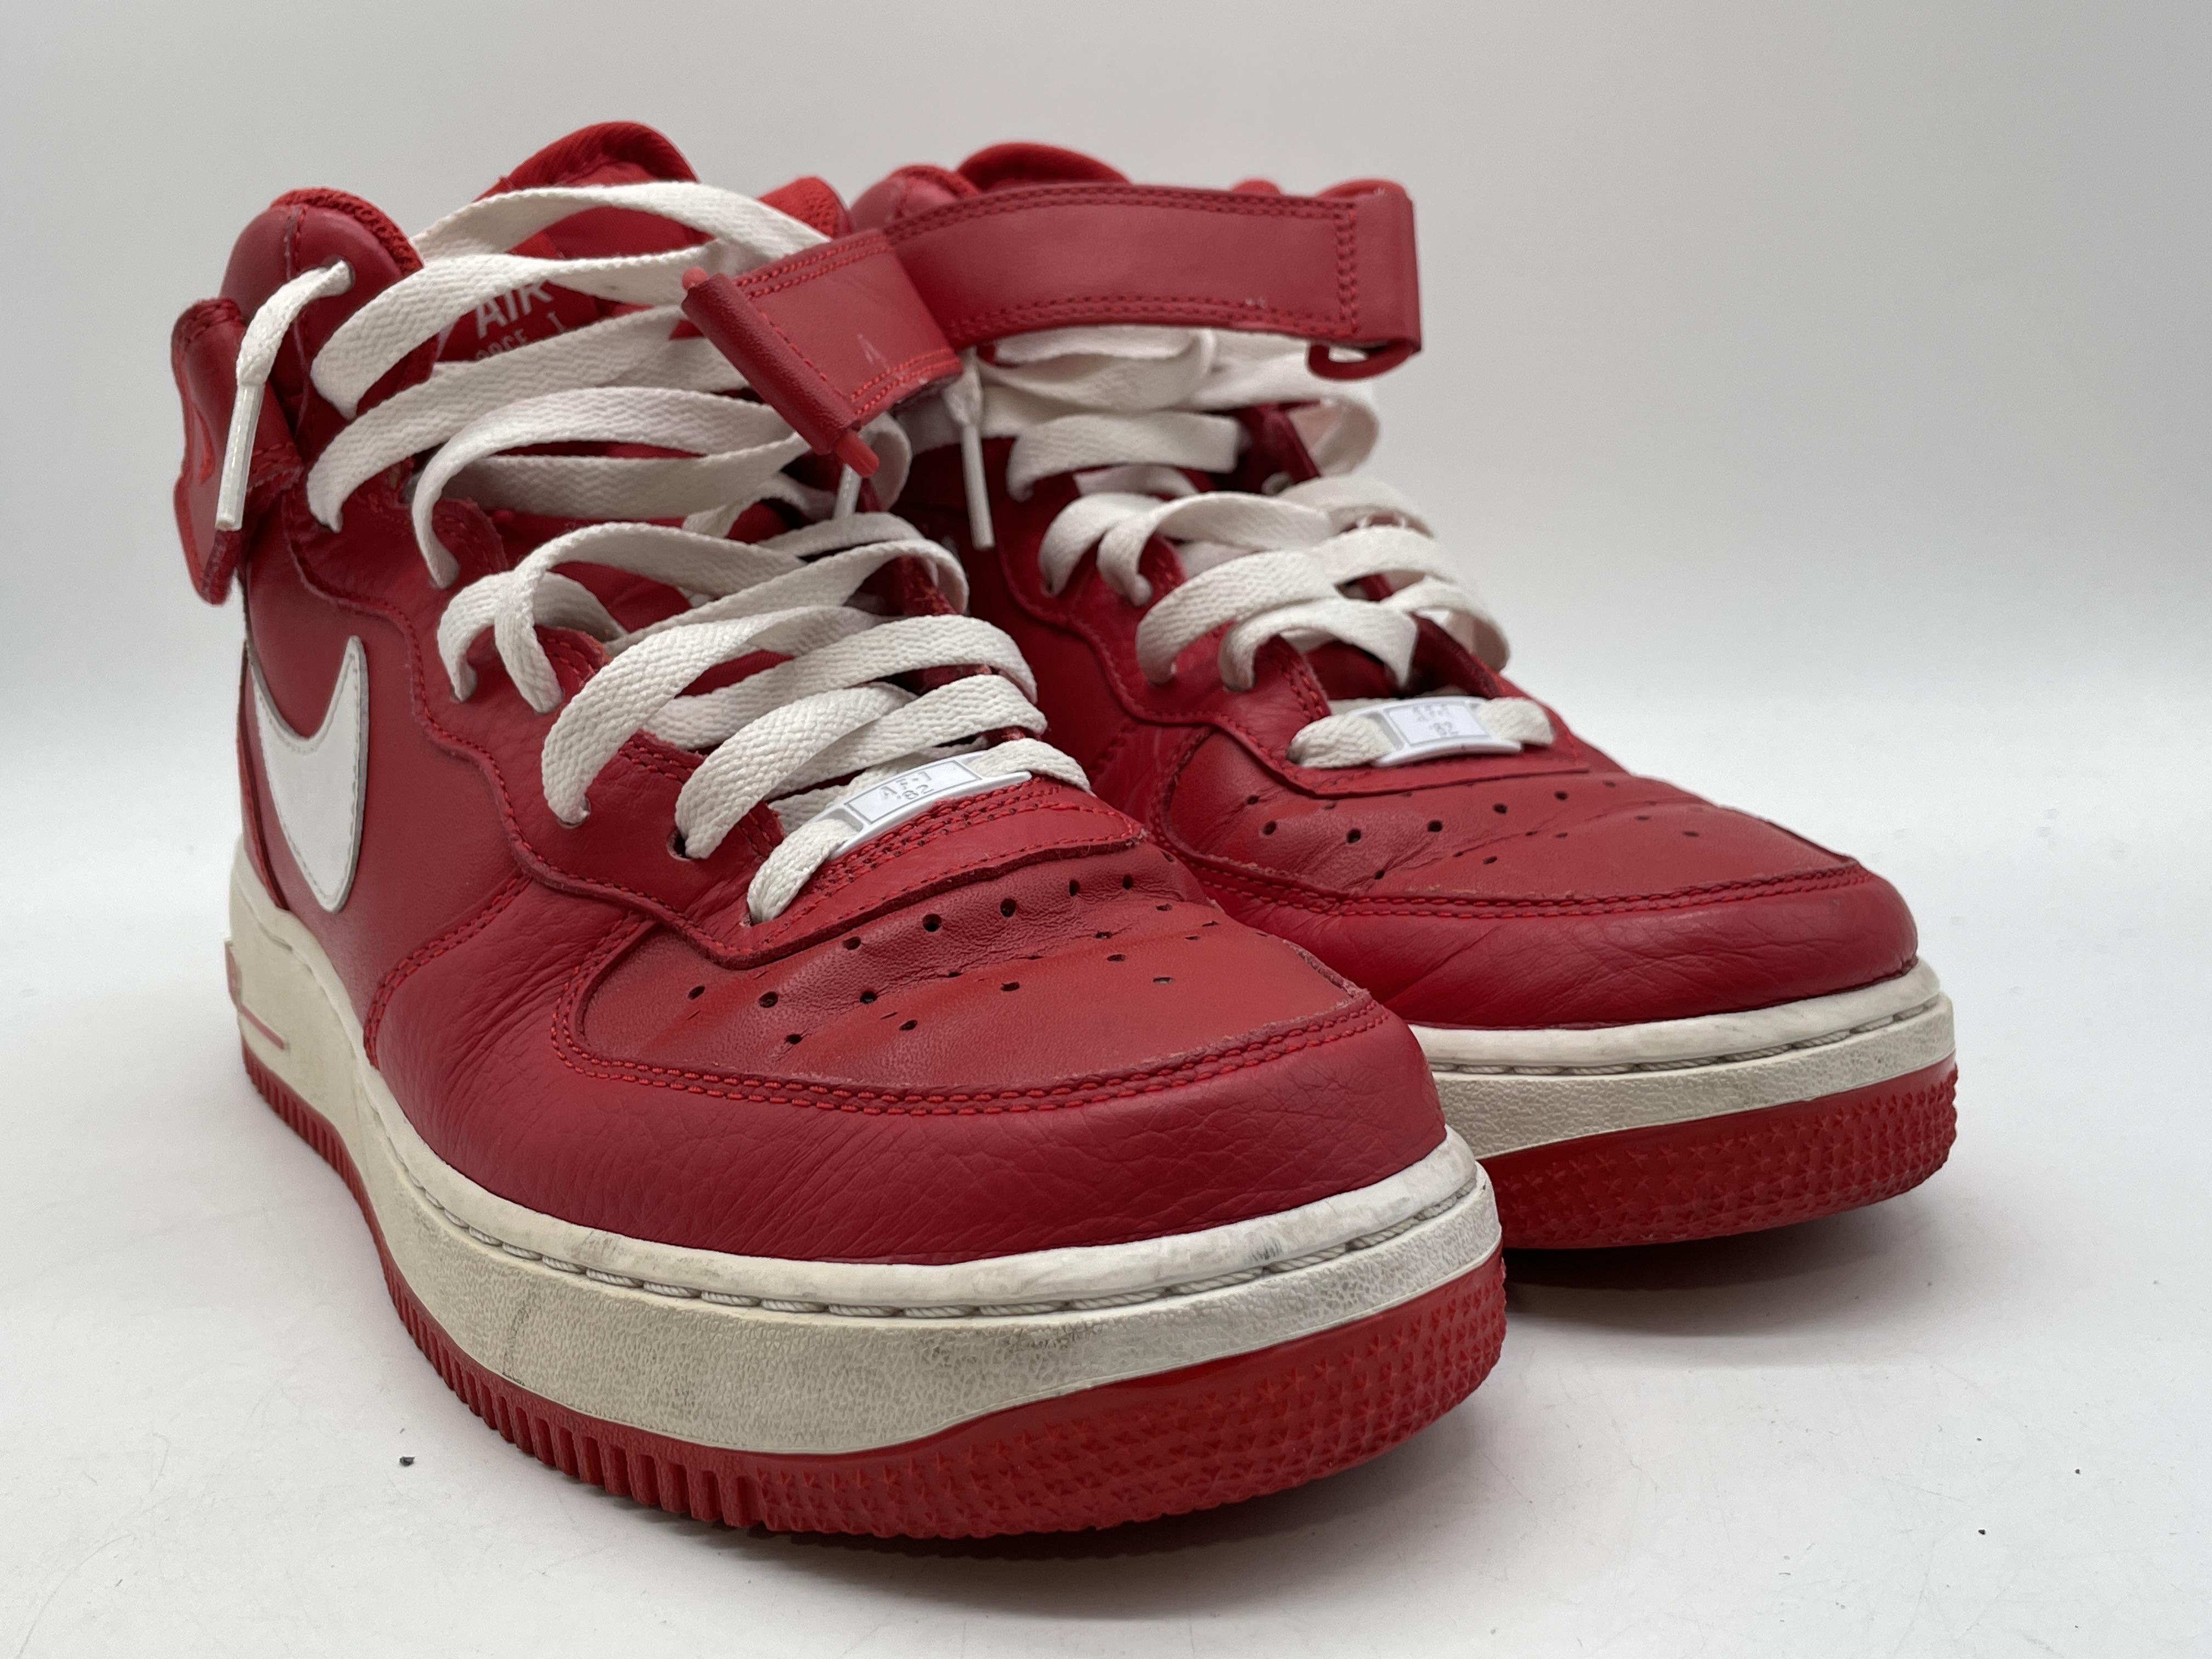 Buy the Mens Air Force 1 White Red Leather Lace Up Mid Top Sneaker